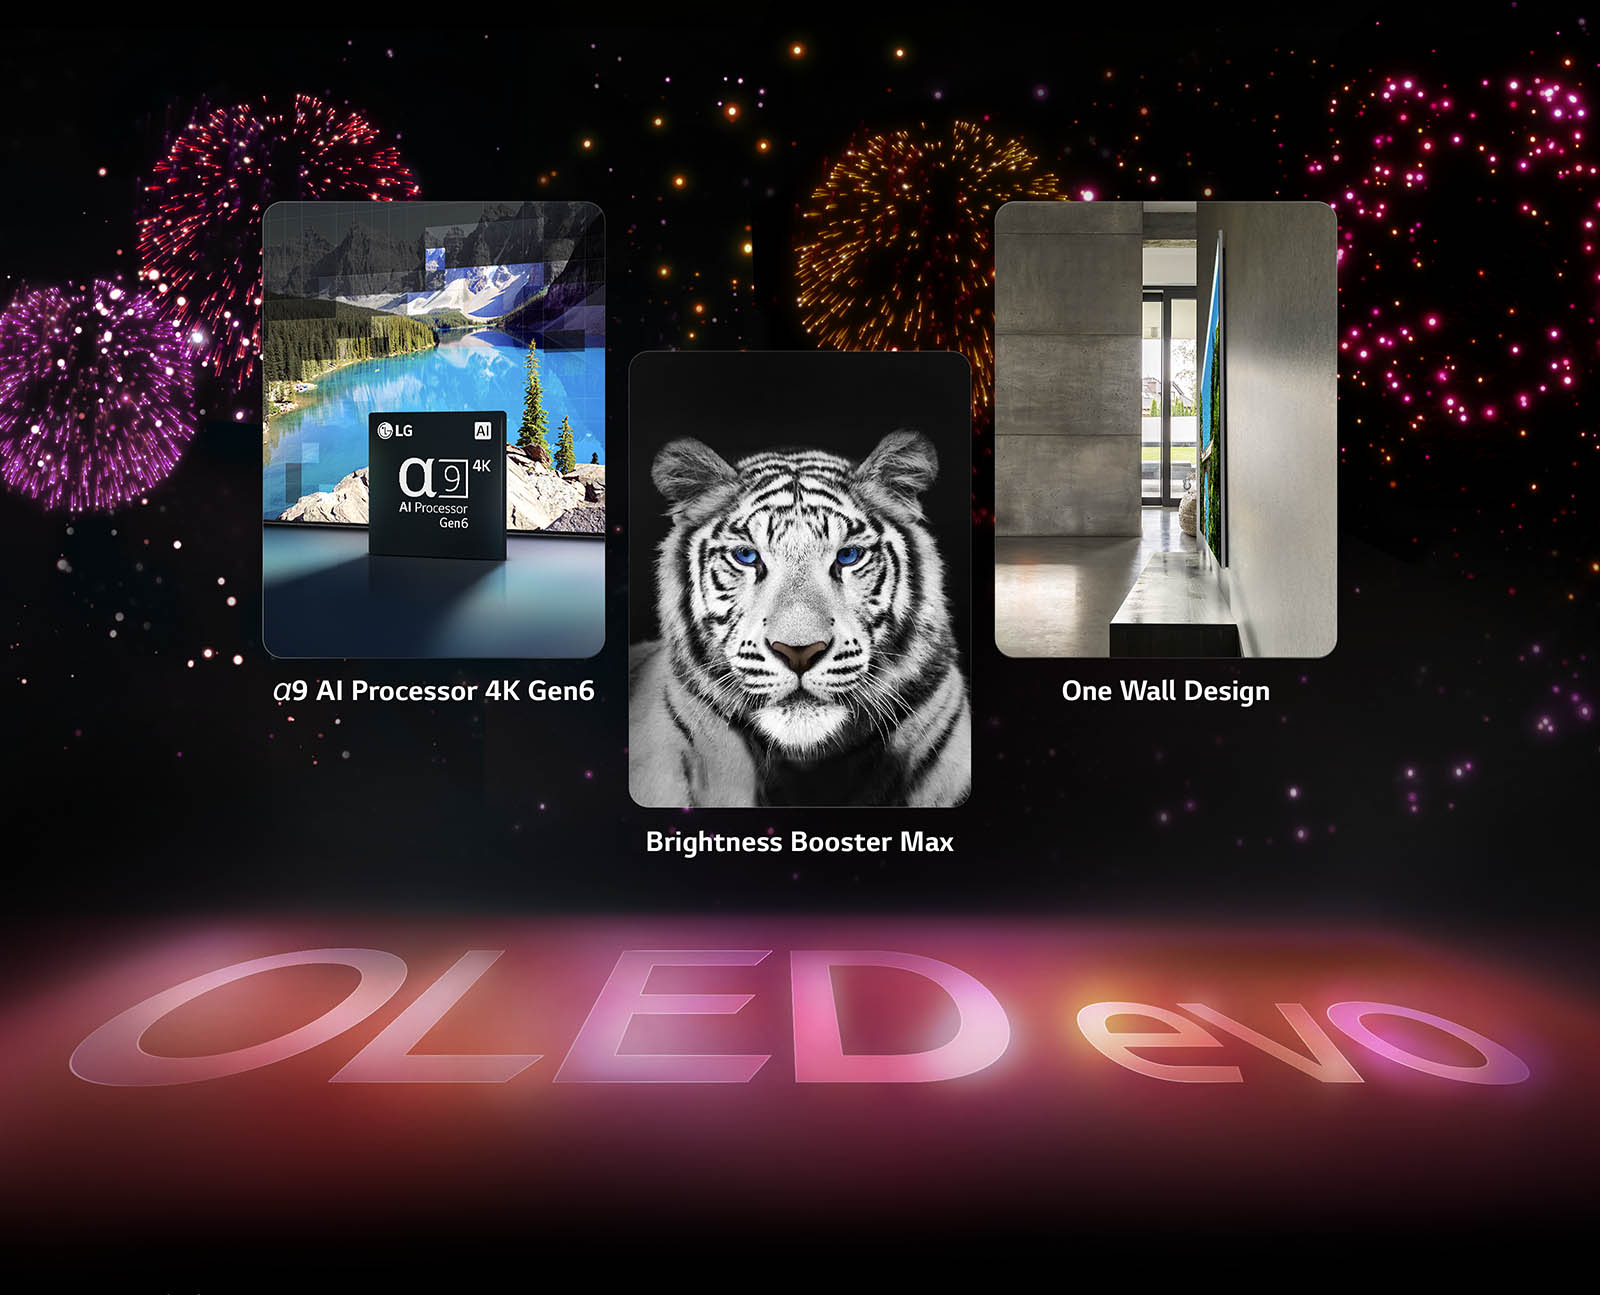 An image presenting the key features of the LG OLED evo G3 against a black background with a pink and purple firework display. The pink reflection from the firework display on the ground shows the words "OLED evo." Within the picture, an image depicting the α9 AI Processor 4K Gen6 shows the chip standing before a picture of a lake scene being remastered with the processing technology. An image presenting Brightness Booster Max shows a tiger with deep contrast and bright whites. An image presenting One Wall Design shows LG OLED evo G3 flush against the wall in a grey industrial living space.